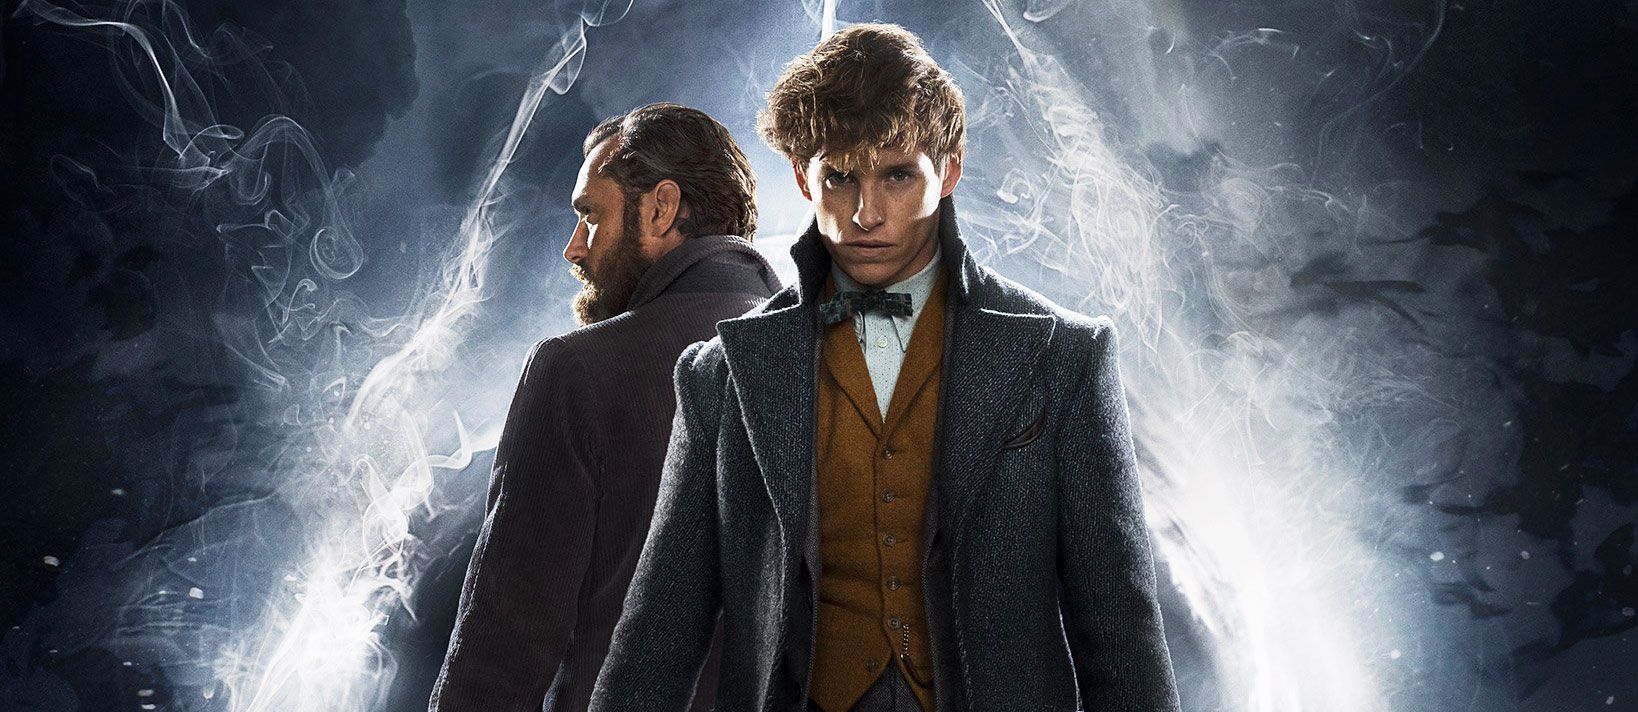 fantastic beasts the crimes of grindelwald post dumbledore and newt scamander